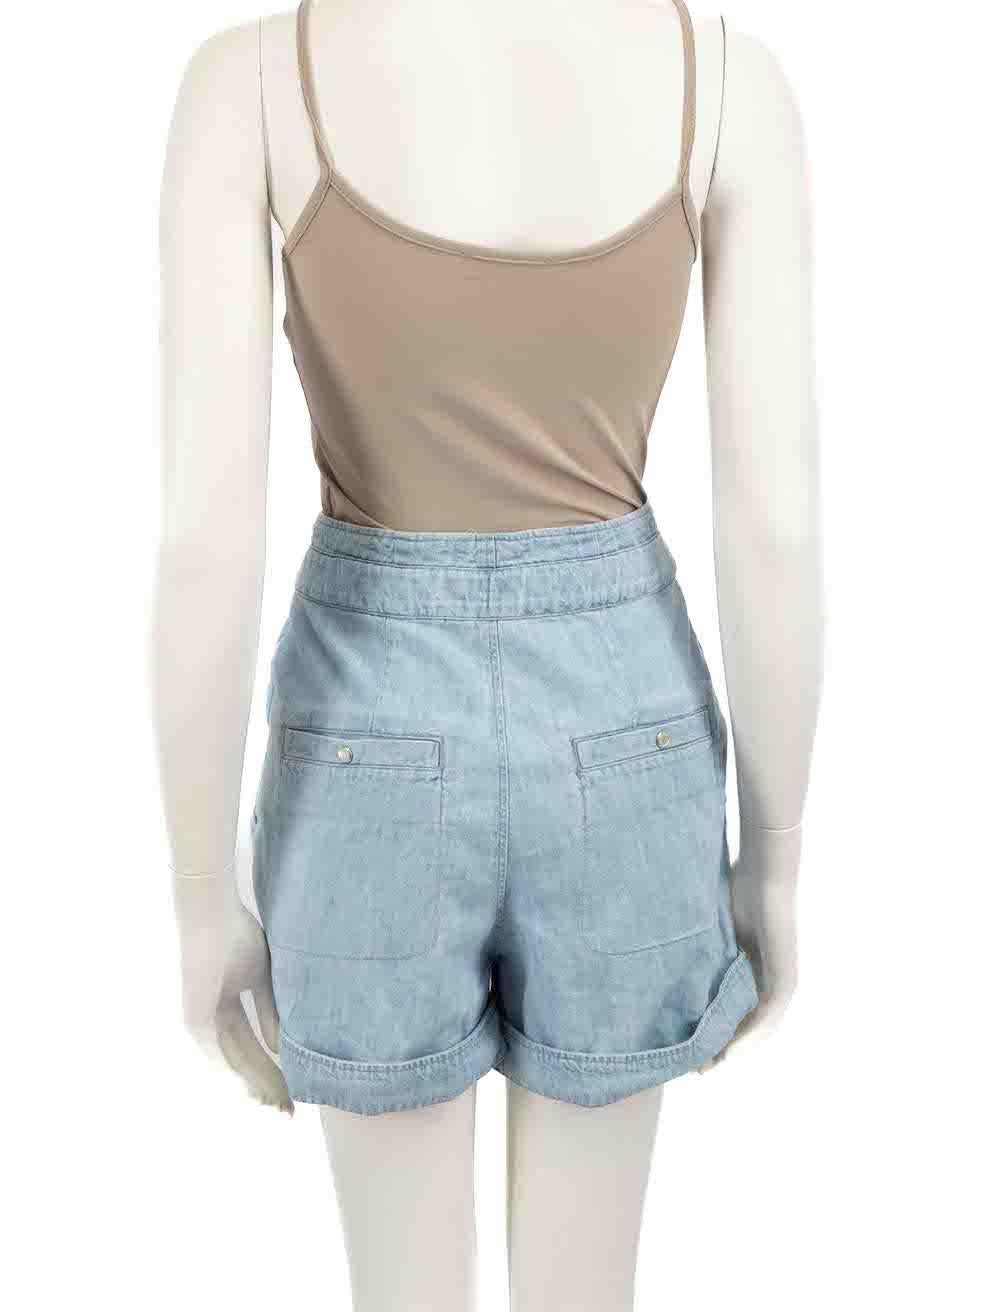 CONDITION is Very good. Minimal wear to shorts is evident. Minimal wear to the waistband with light discolouration on this used Isabel Marant Étoile designer resale item.
 
Details
Blue
Denim
Shorts
Tie waist
Snap button and zip fastening
High